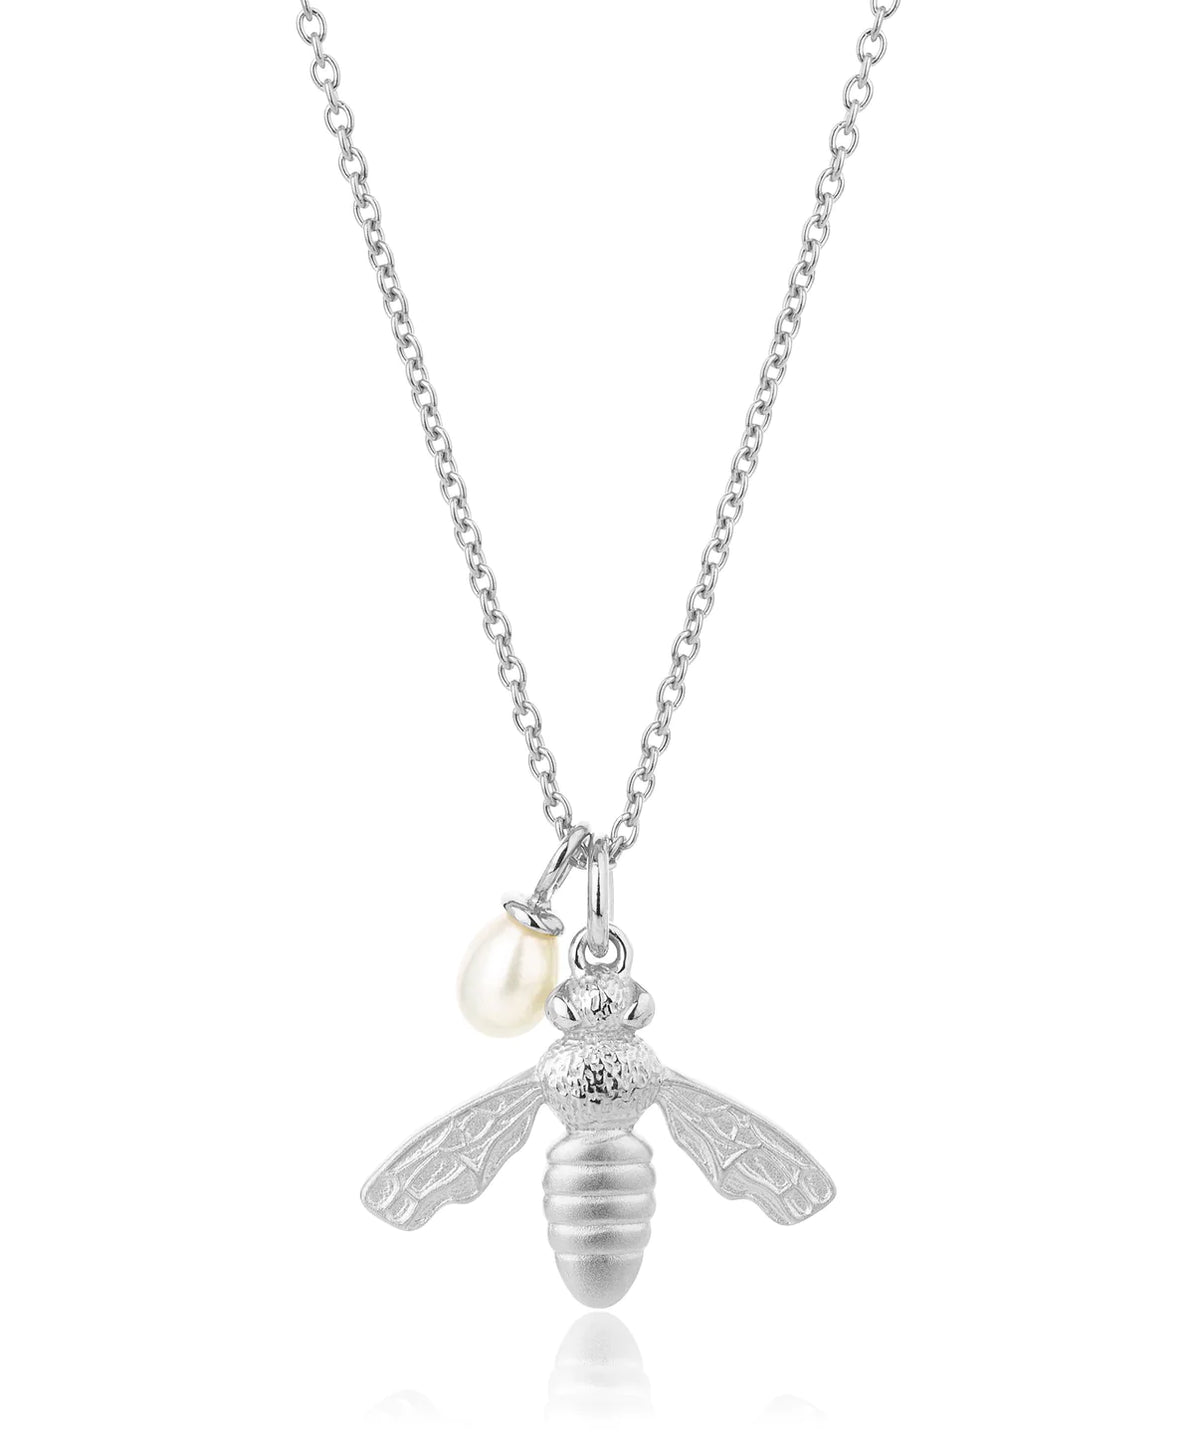 Silver bee pendant necklace with rice pearl